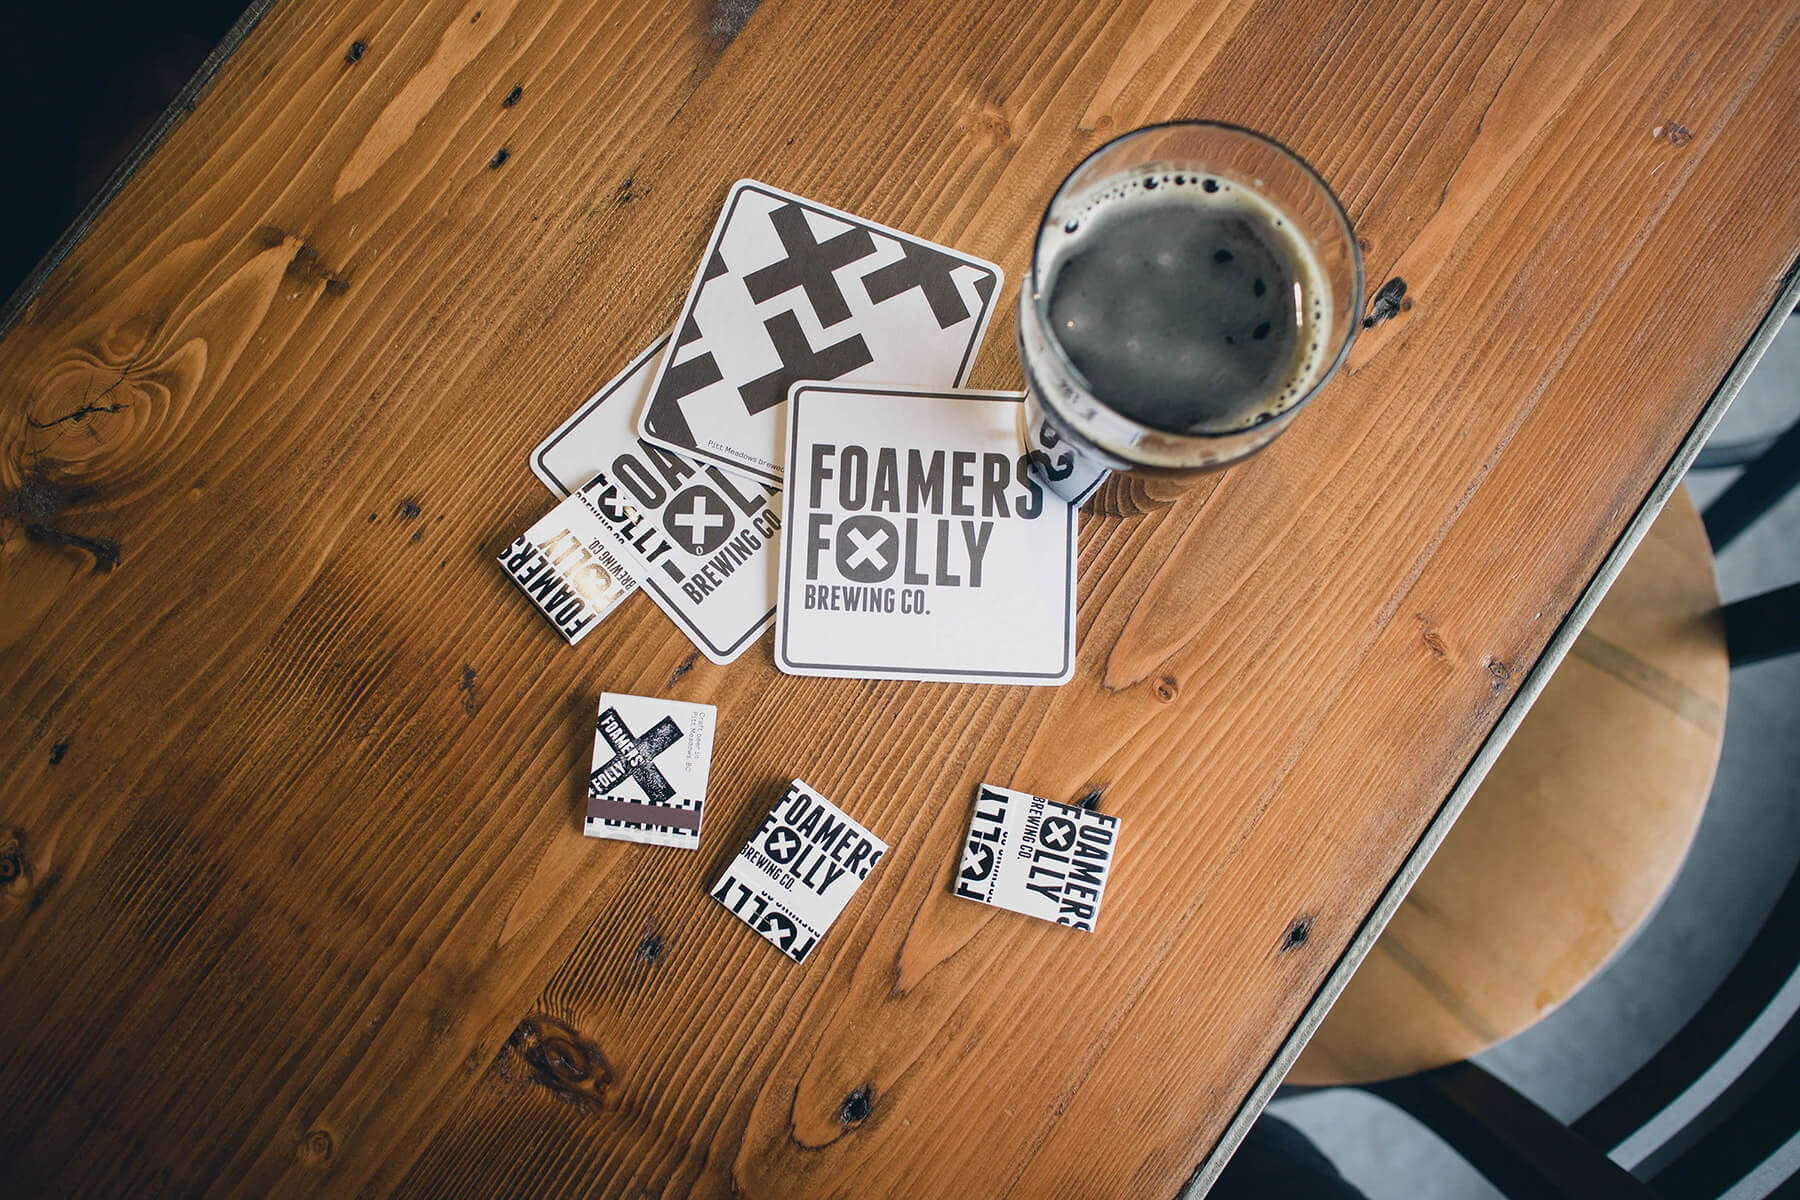 Foamers' Folly Brewing Co. graphic design by Rachel Teresa Park and Michael Strasky